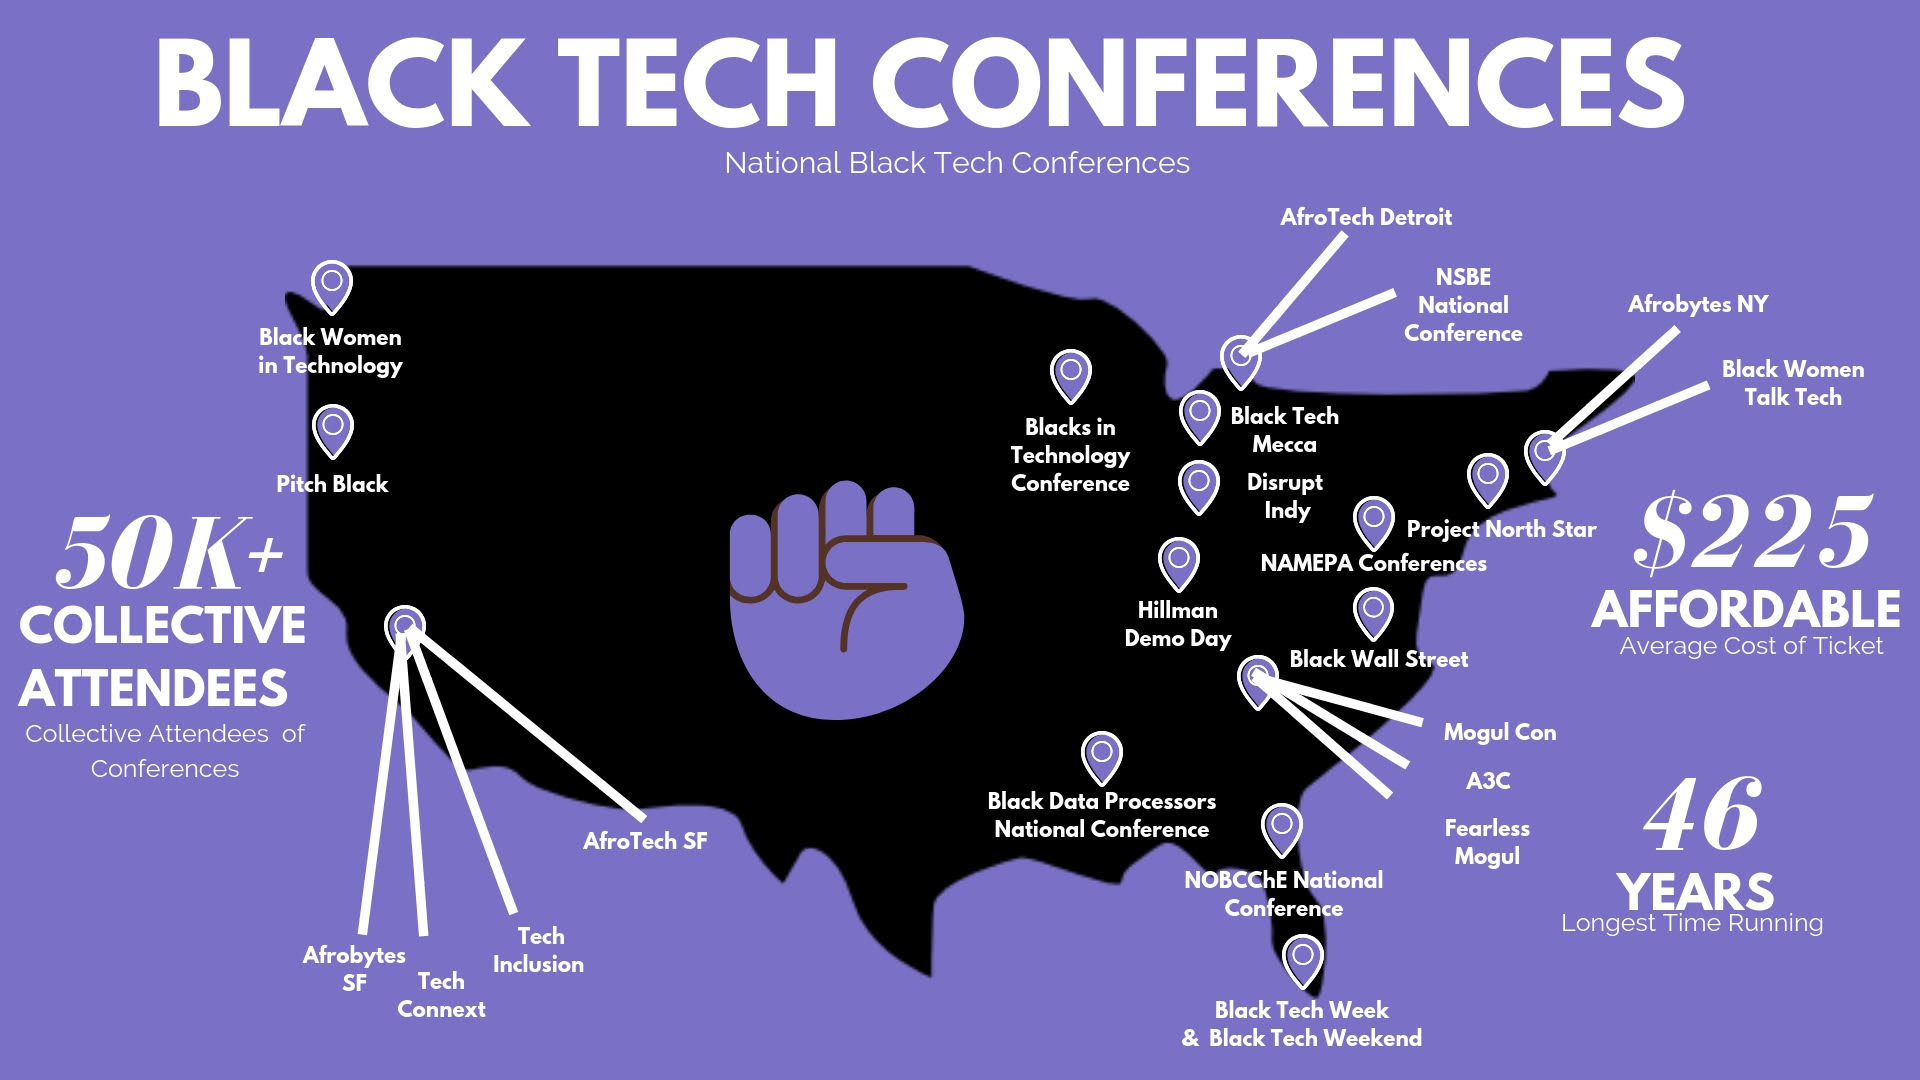 Black Tech Conferences Offer a Lifeline in a Predominantly White